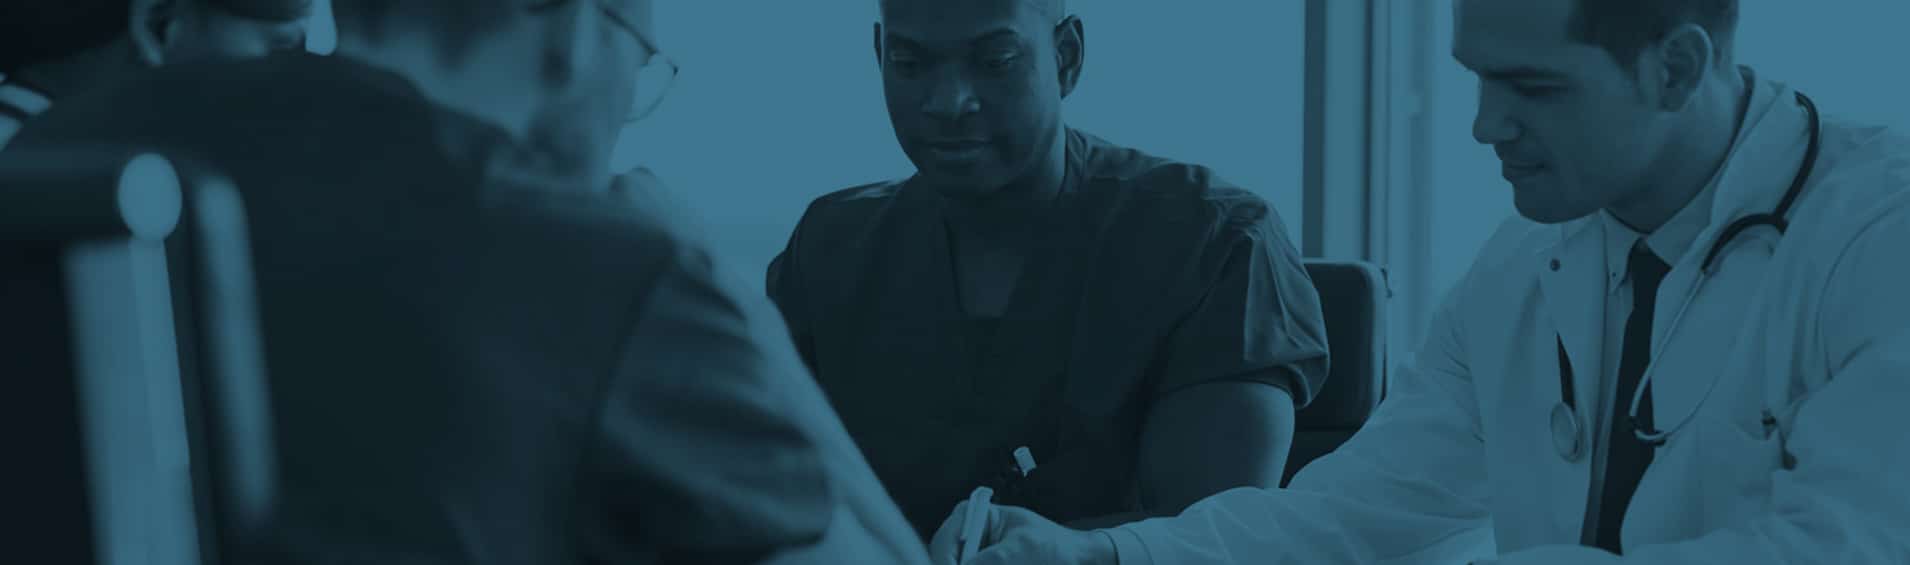 Learn best practices for management and compliance connected with medical directorships and APP oversight programs and associated stipends.